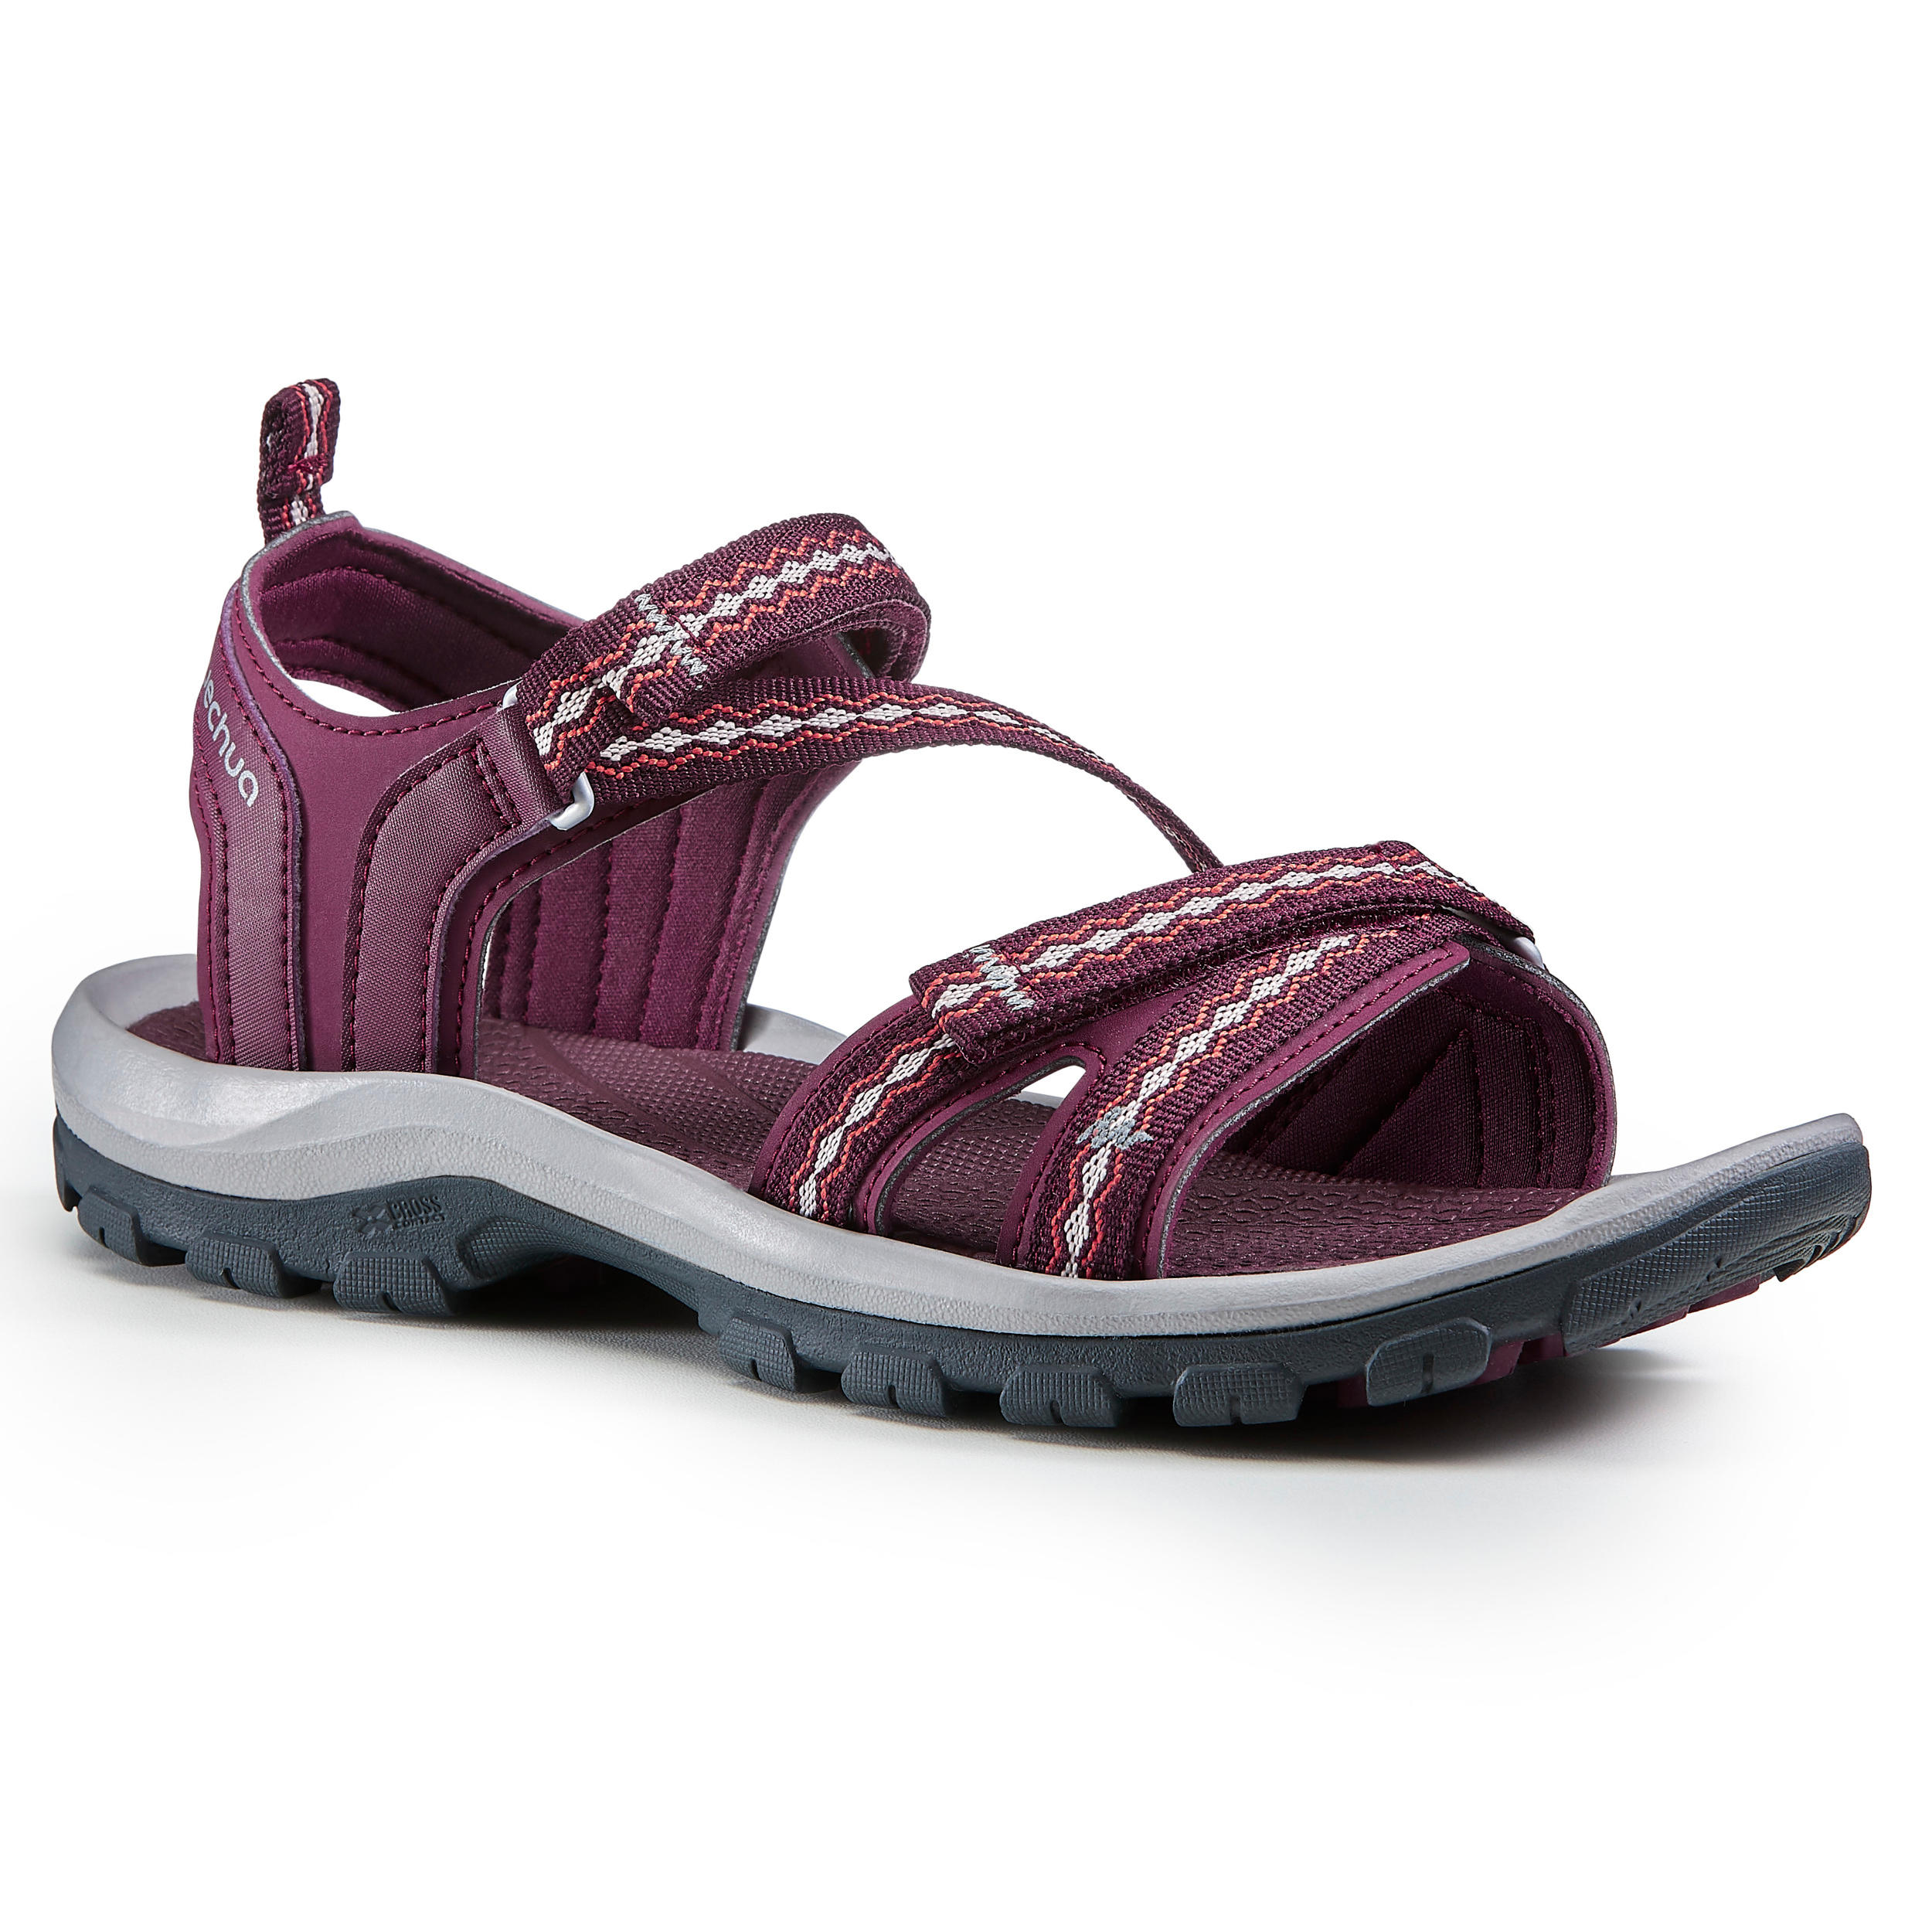 9 Hiking Sandals for Women That Your Feet Will Love | The Healthy-anthinhphatland.vn